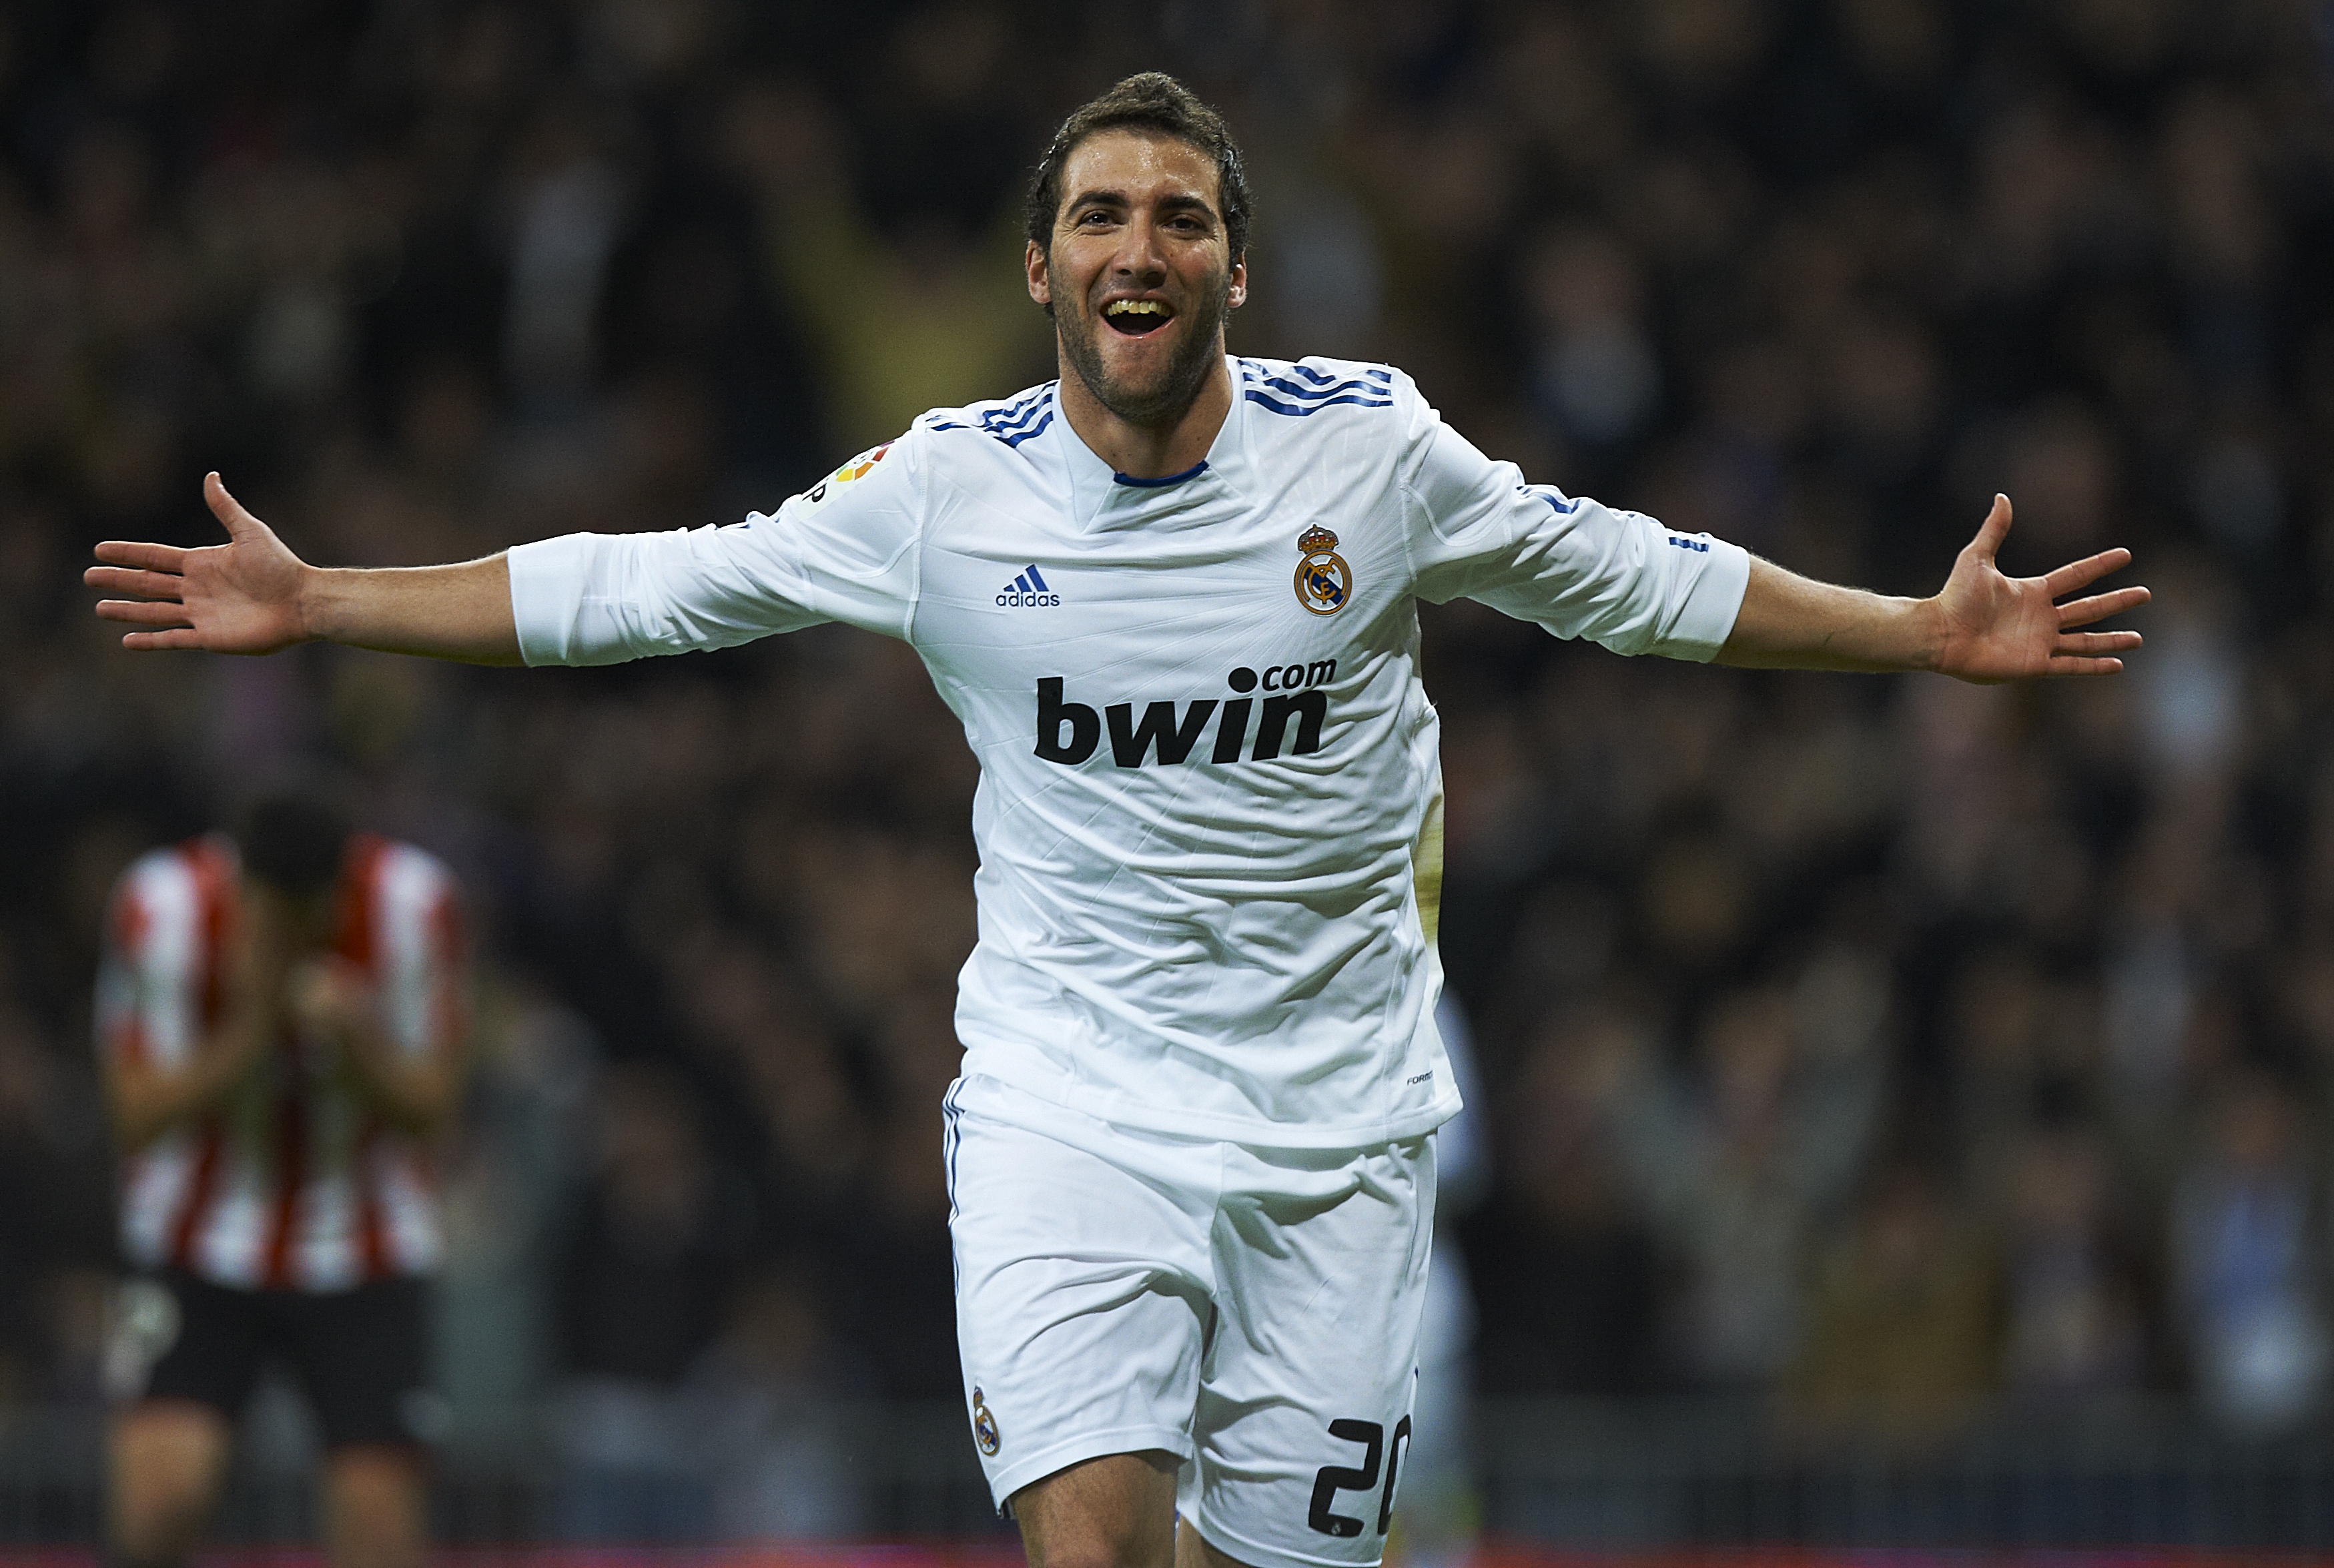 MADRID, SPAIN - NOVEMBER 20:  Gonzalo Higuain of Real Madrid celebrates after scoring the 1-0 during the la liga match between Real Madrid and Athletic Bilbao at Estadio Santiago Bernabeu on November 20, 2010 in Madrid, Spain.  (Photo by Manuel Queimadelo